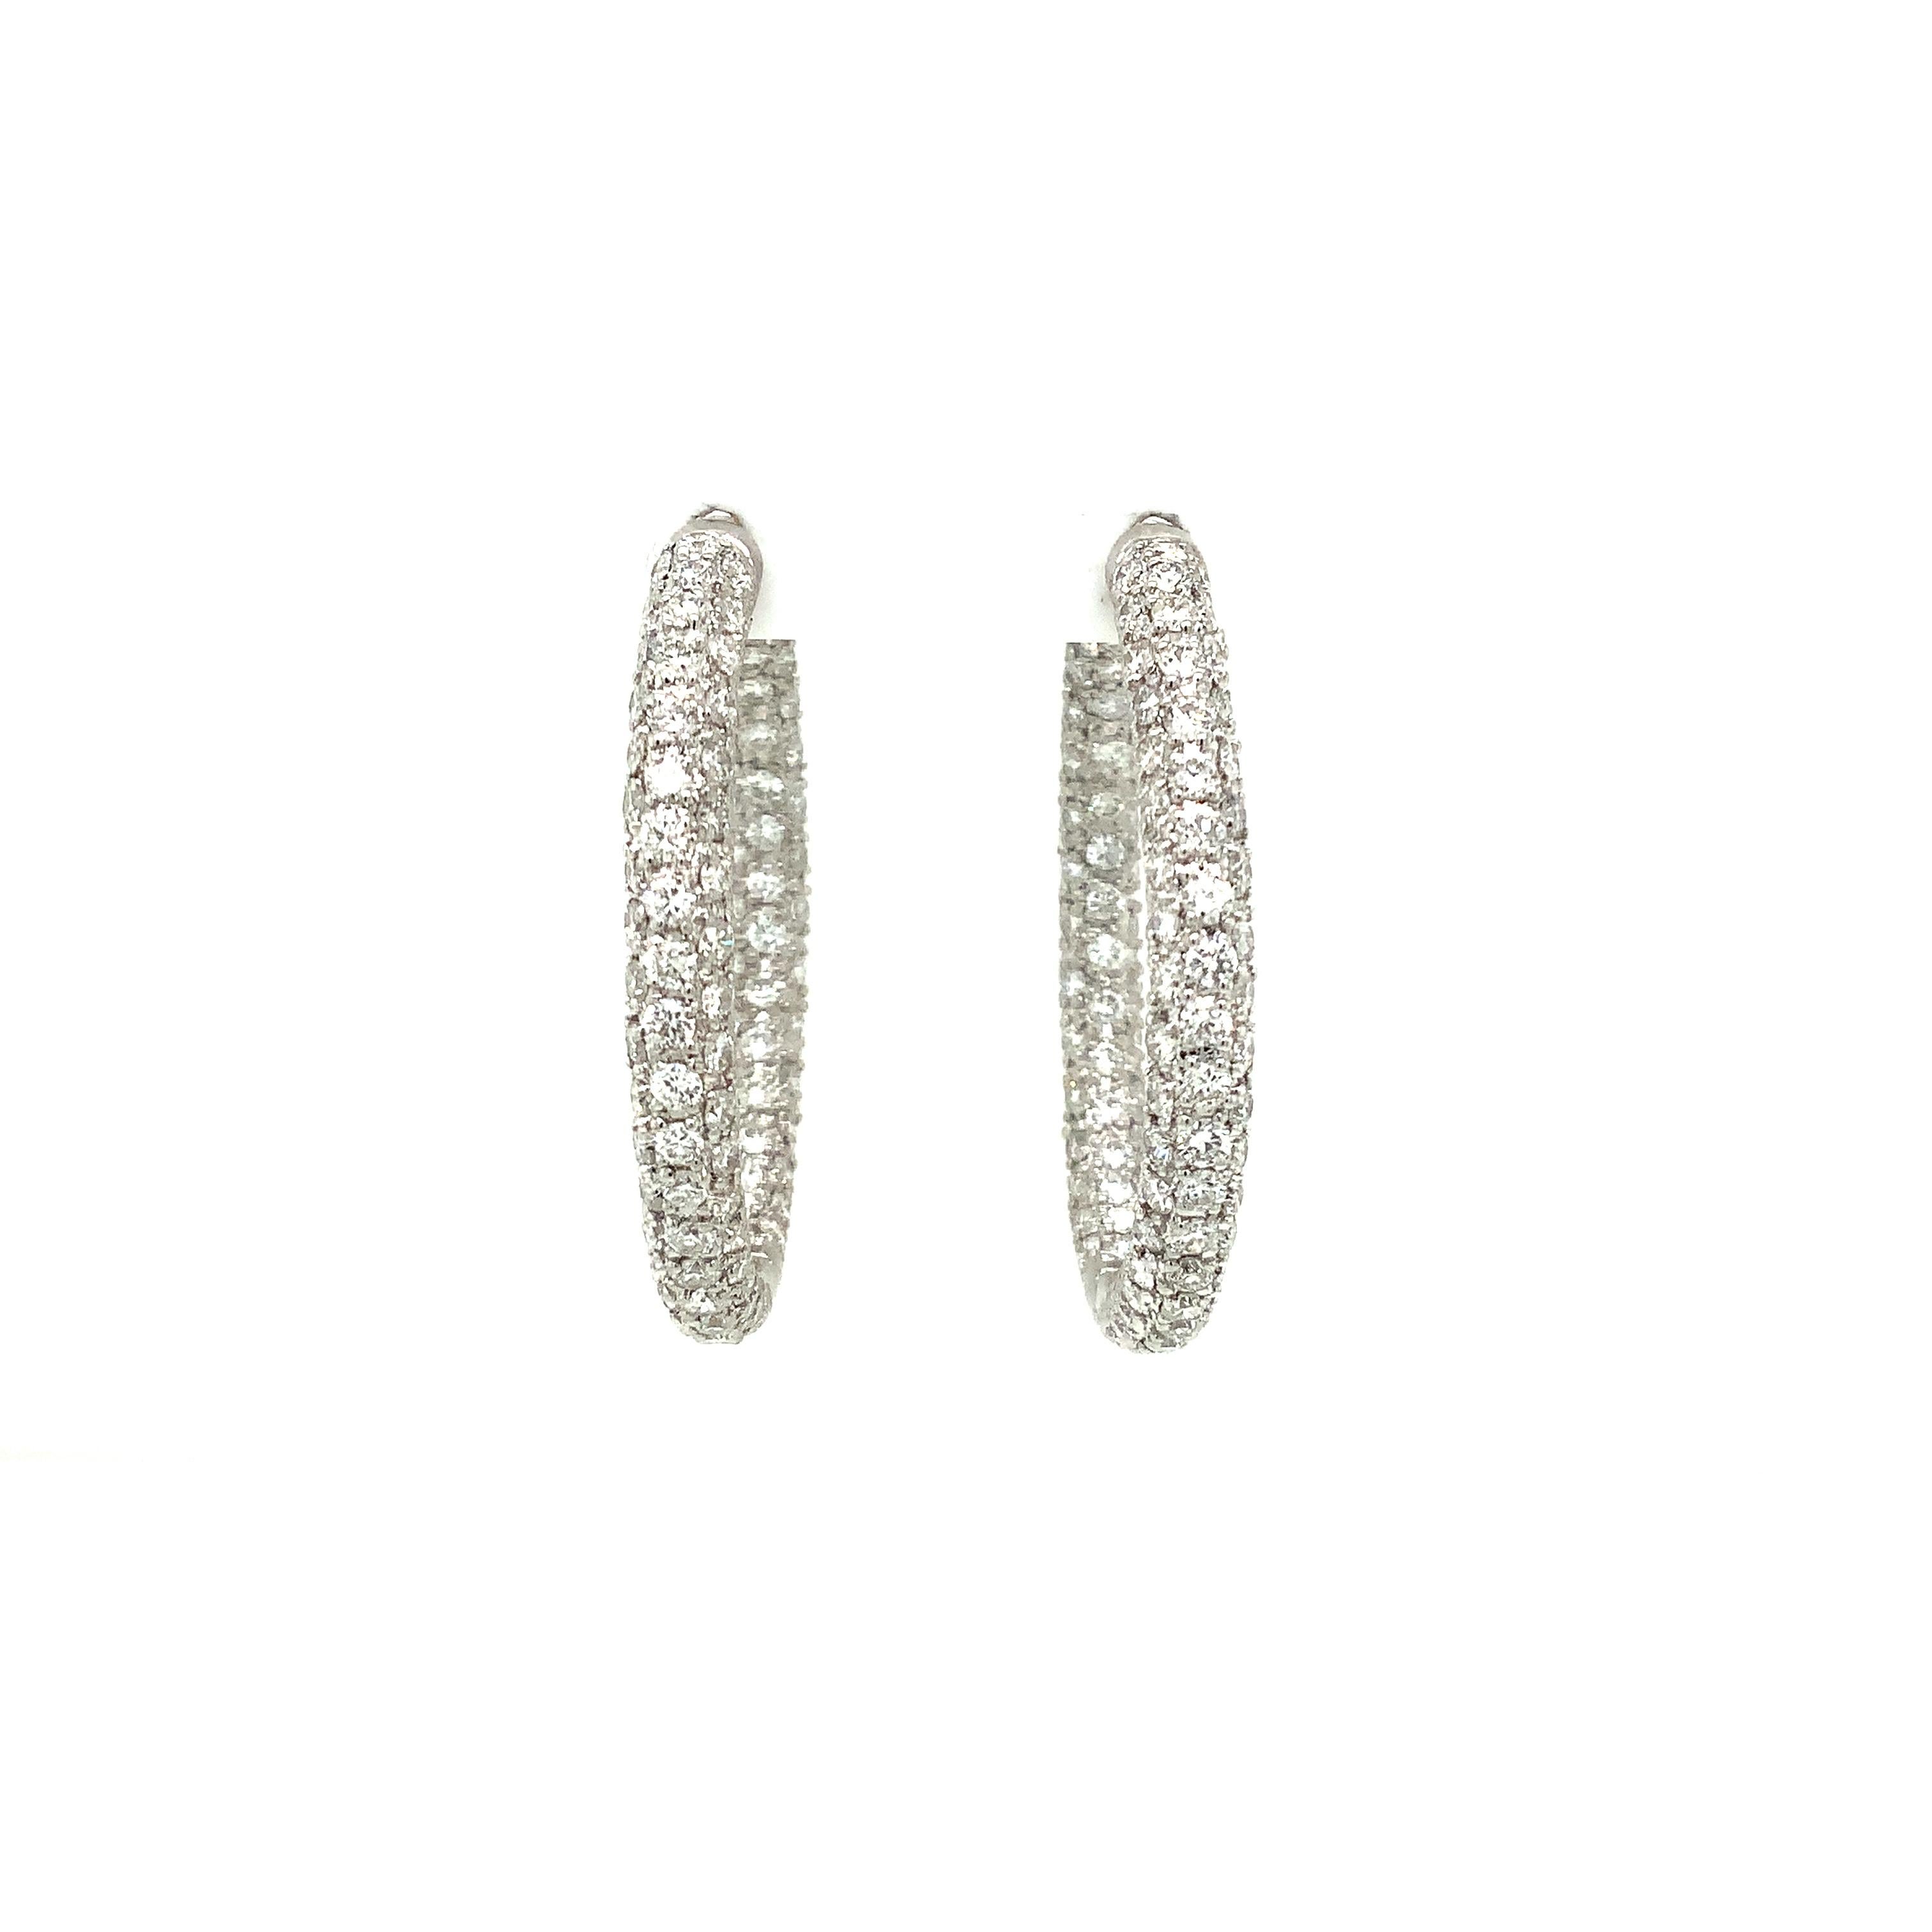  Pavé 3 Row Round Inside -Outside Diamond Hoop Earrings Set in 18K White Gold. 

This Earring contains 210 Round Brilliant Cut Diamonds securely set into this magnificent 3 3-row round Inside-Outside Diamond Hoop earring set, crafted in 18K White